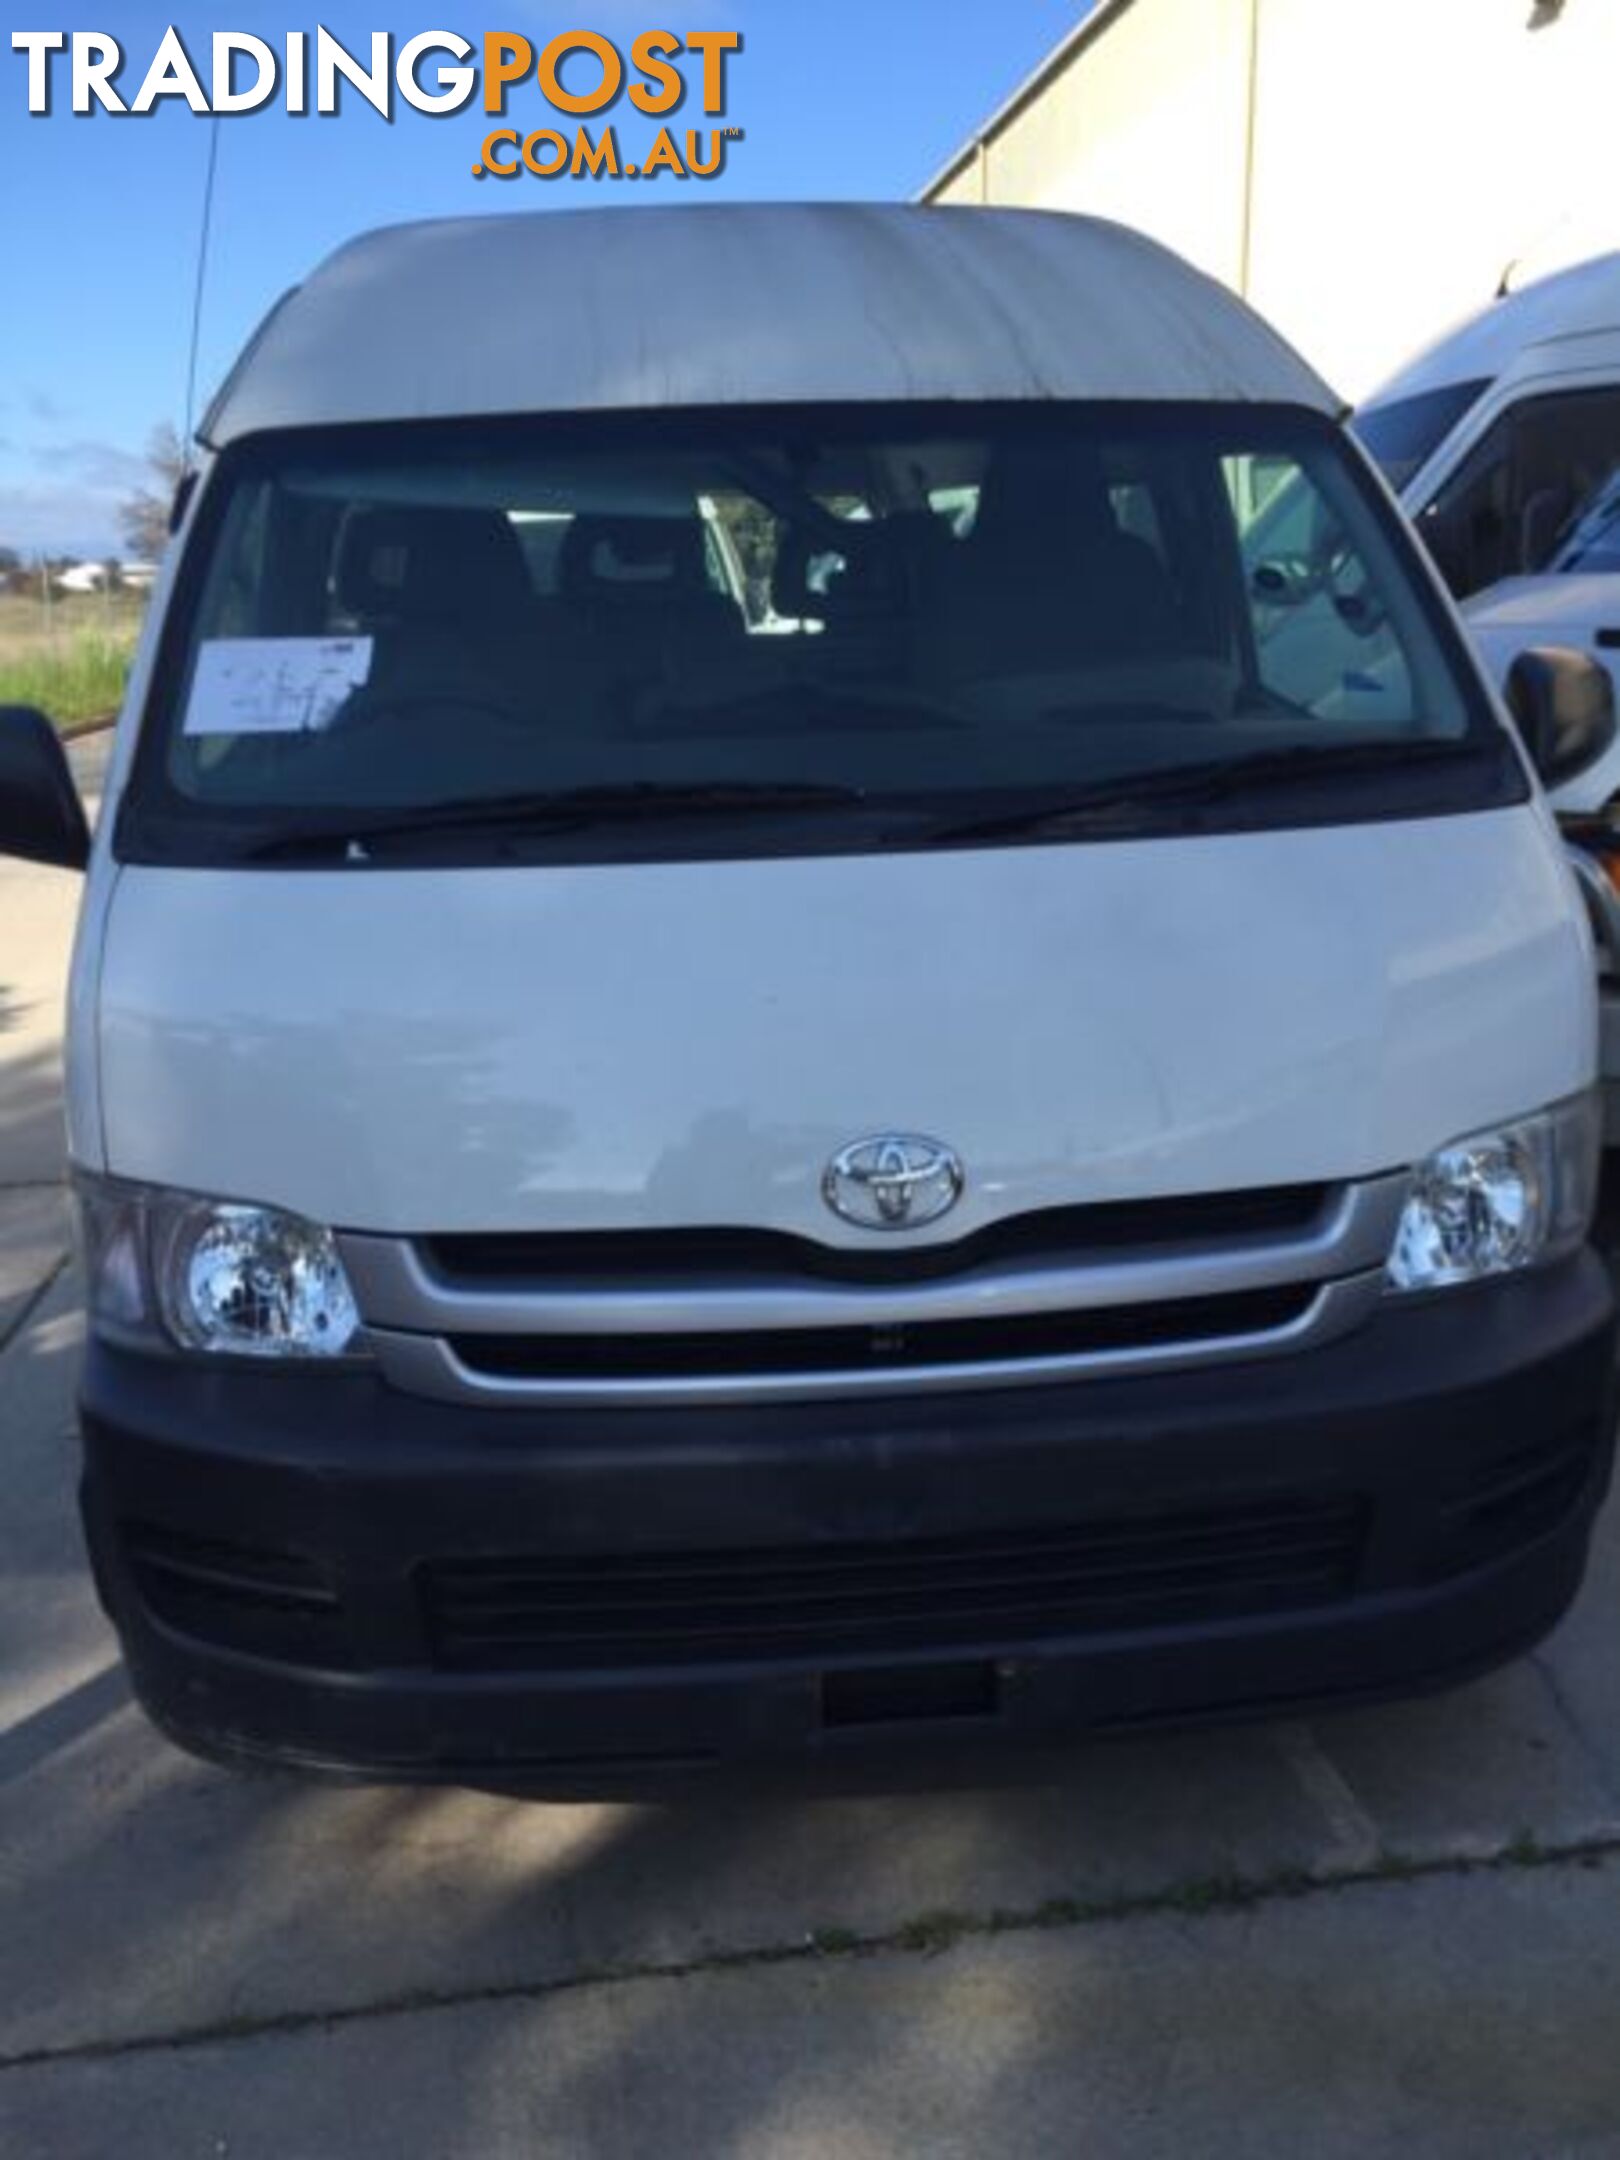 2008 Toyota Hiace Commuter 11 seater - now wrecking